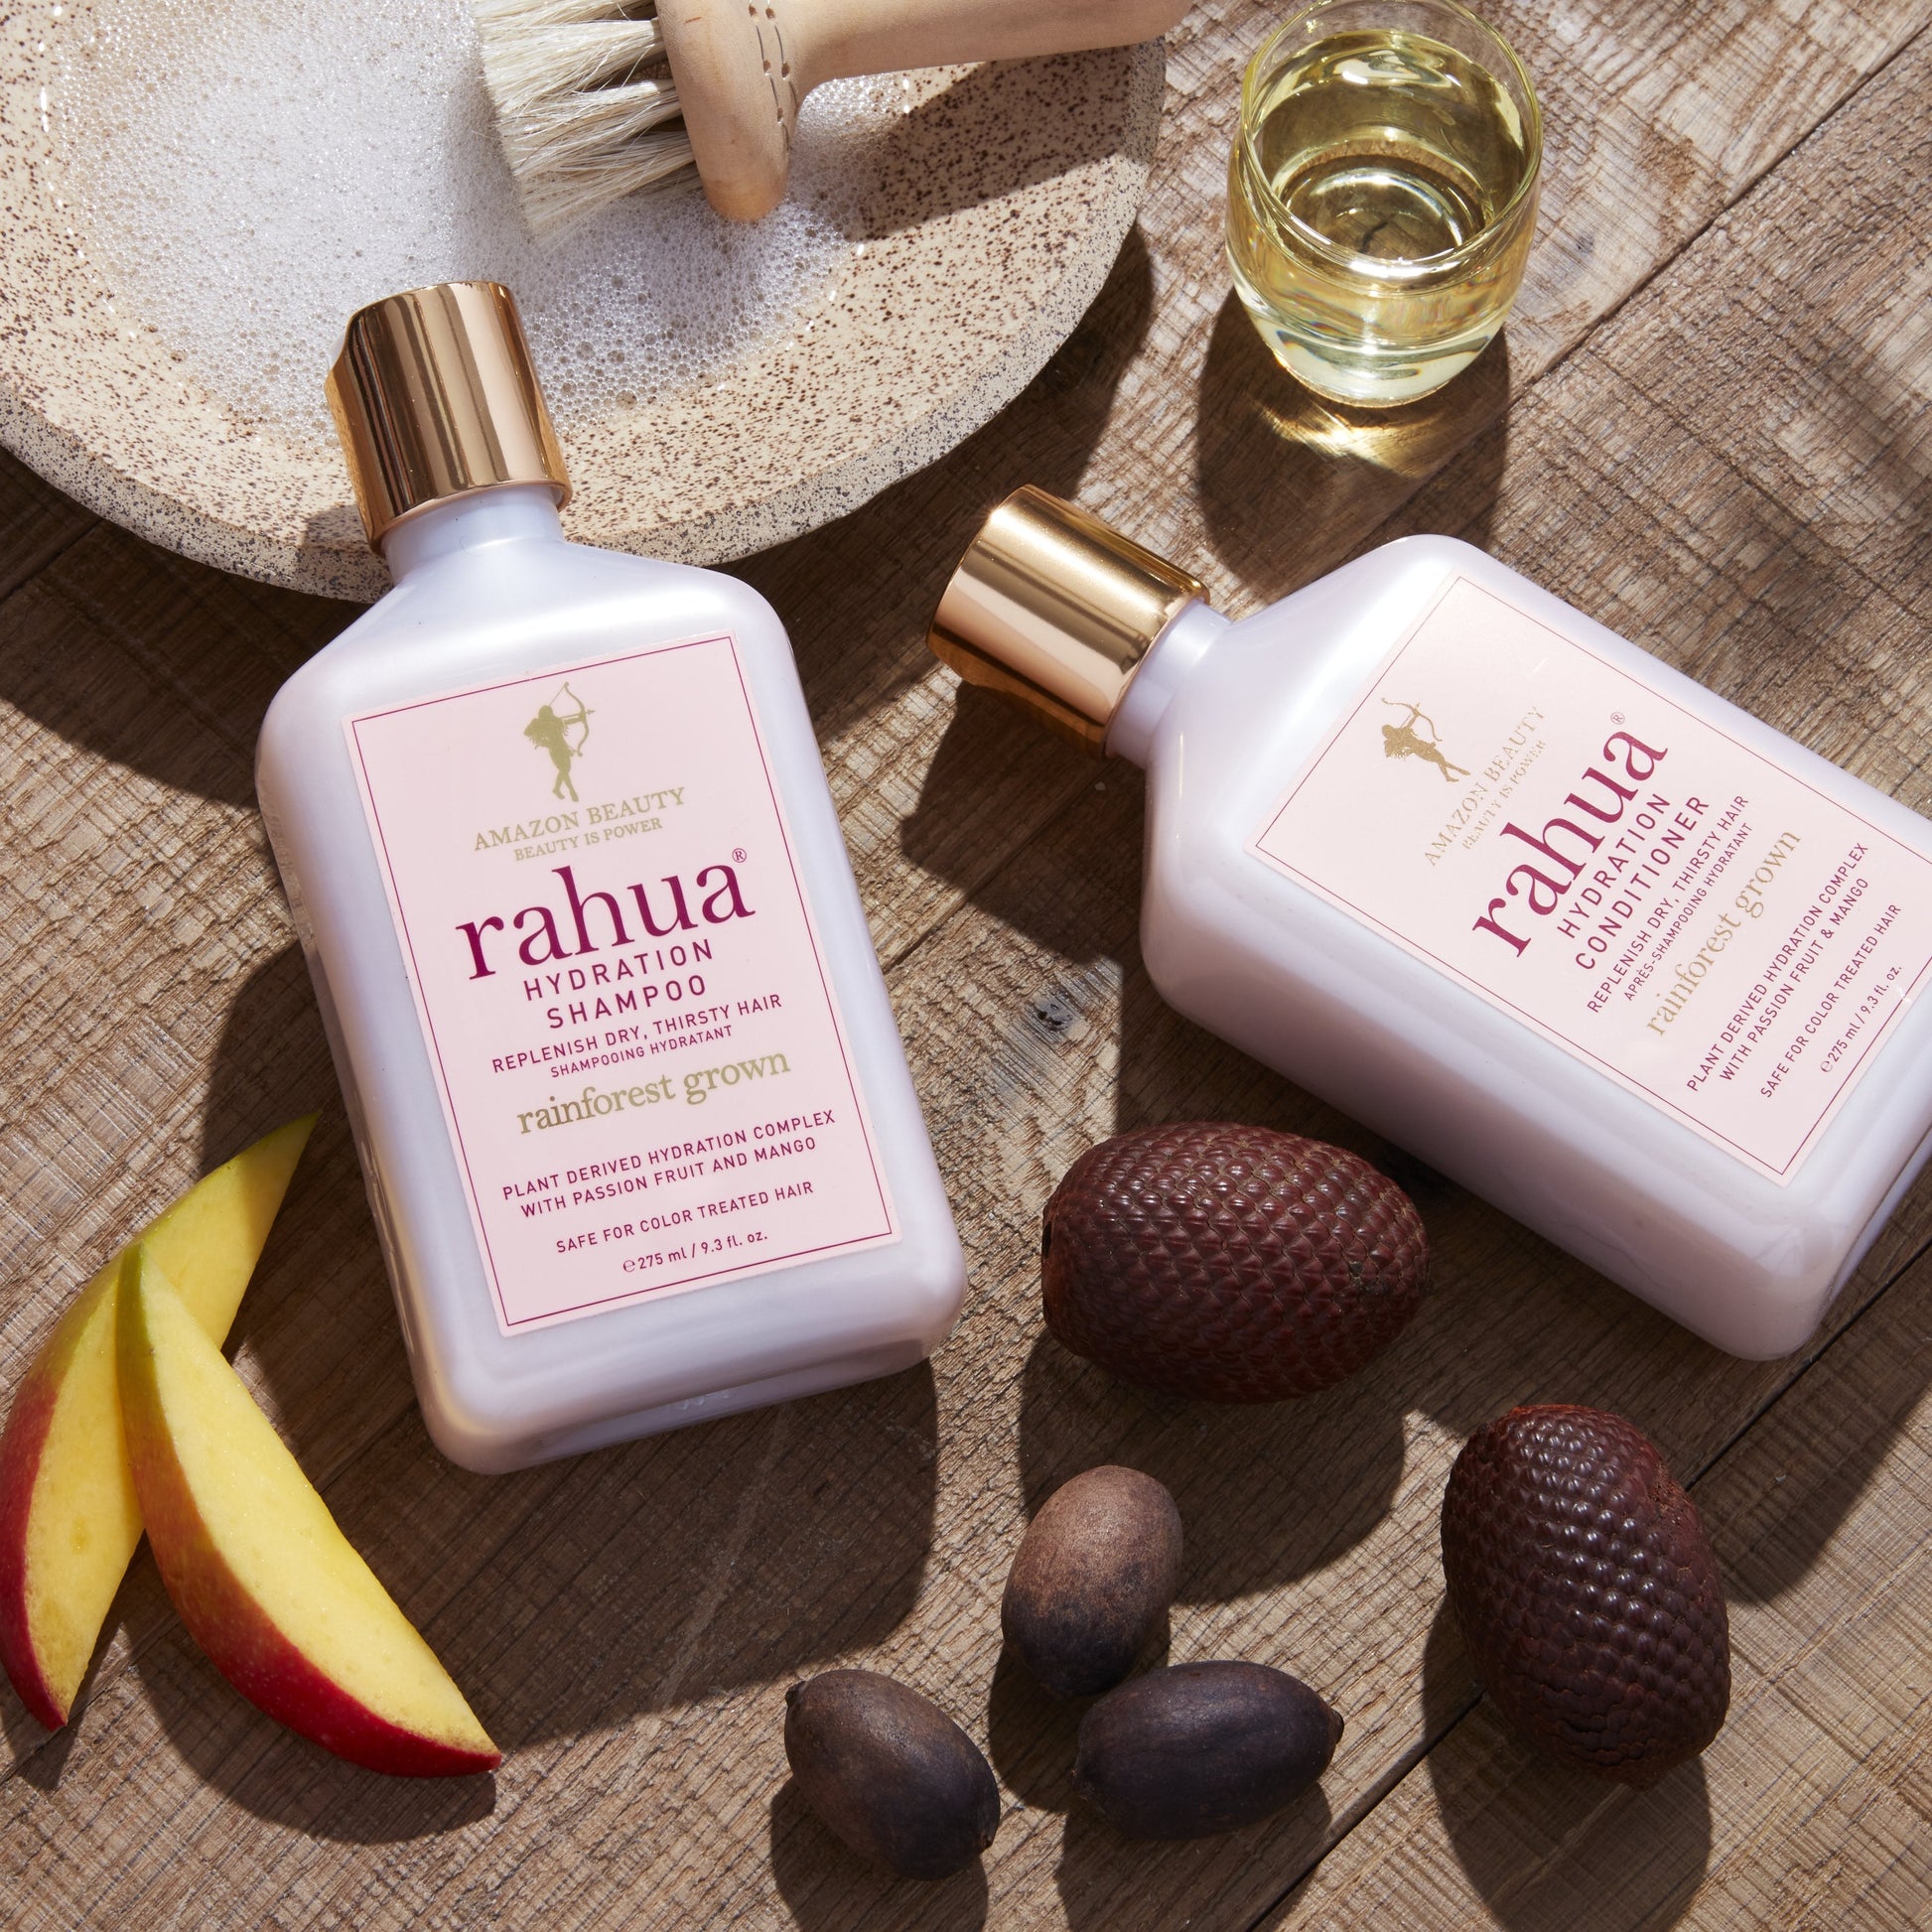 Rahua Hydration Shampoo and conditioner with oil